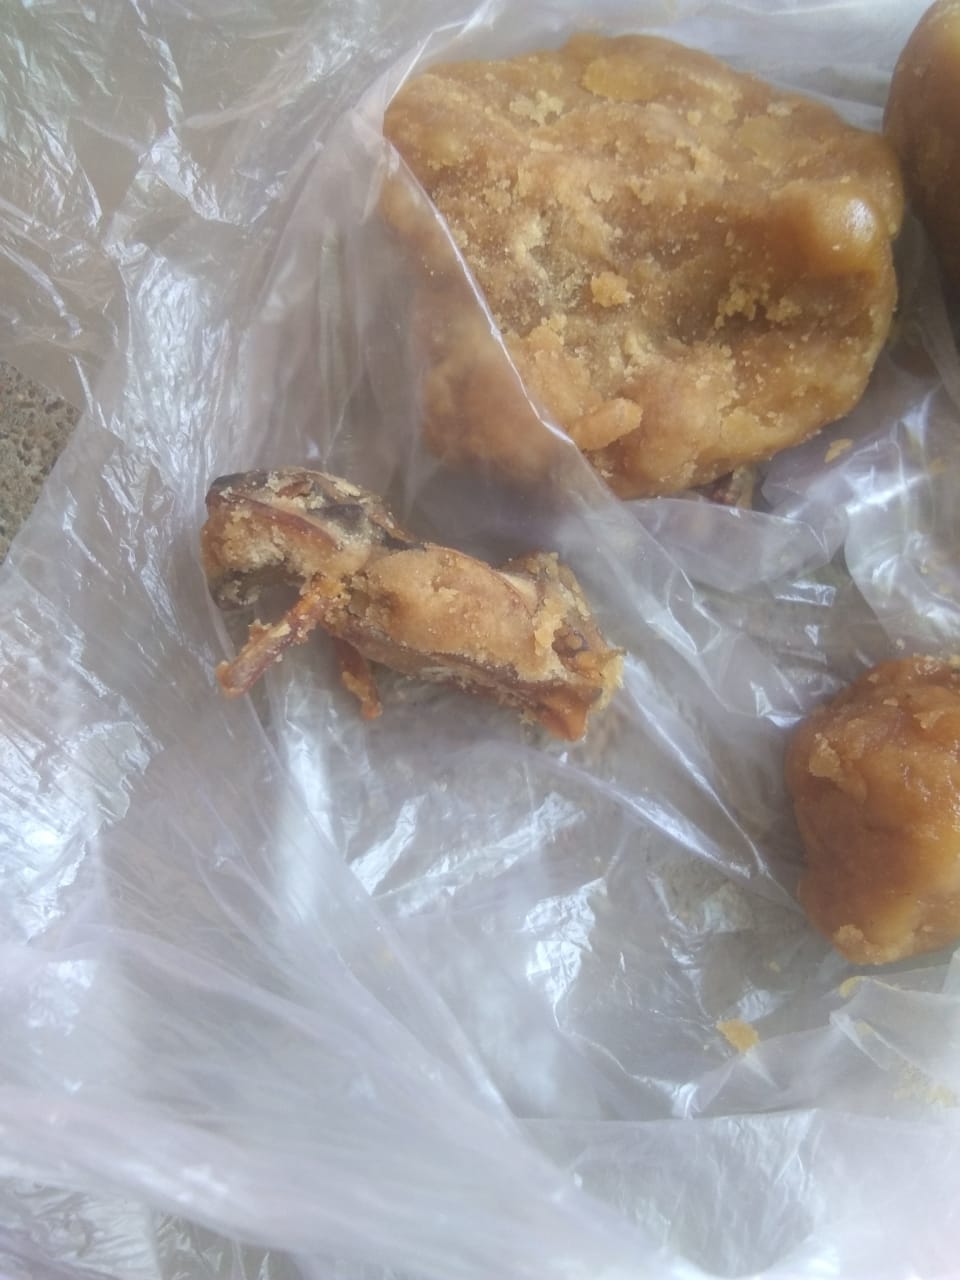 Dead frog found inside jaggery purchased from fair price shop in kanker